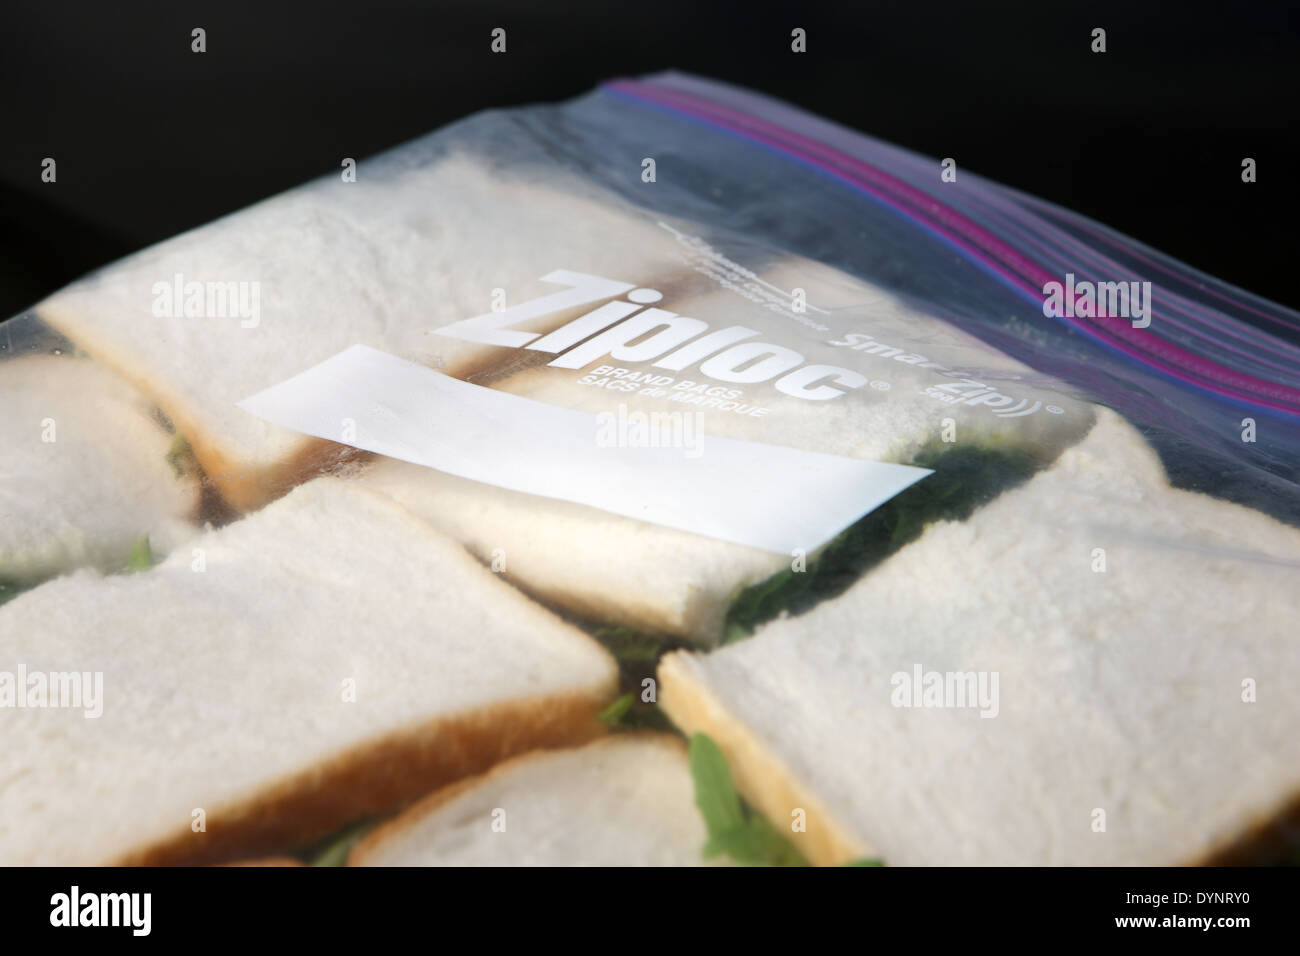 Ziploc bag packed with white bread sandwiches Stock Photo